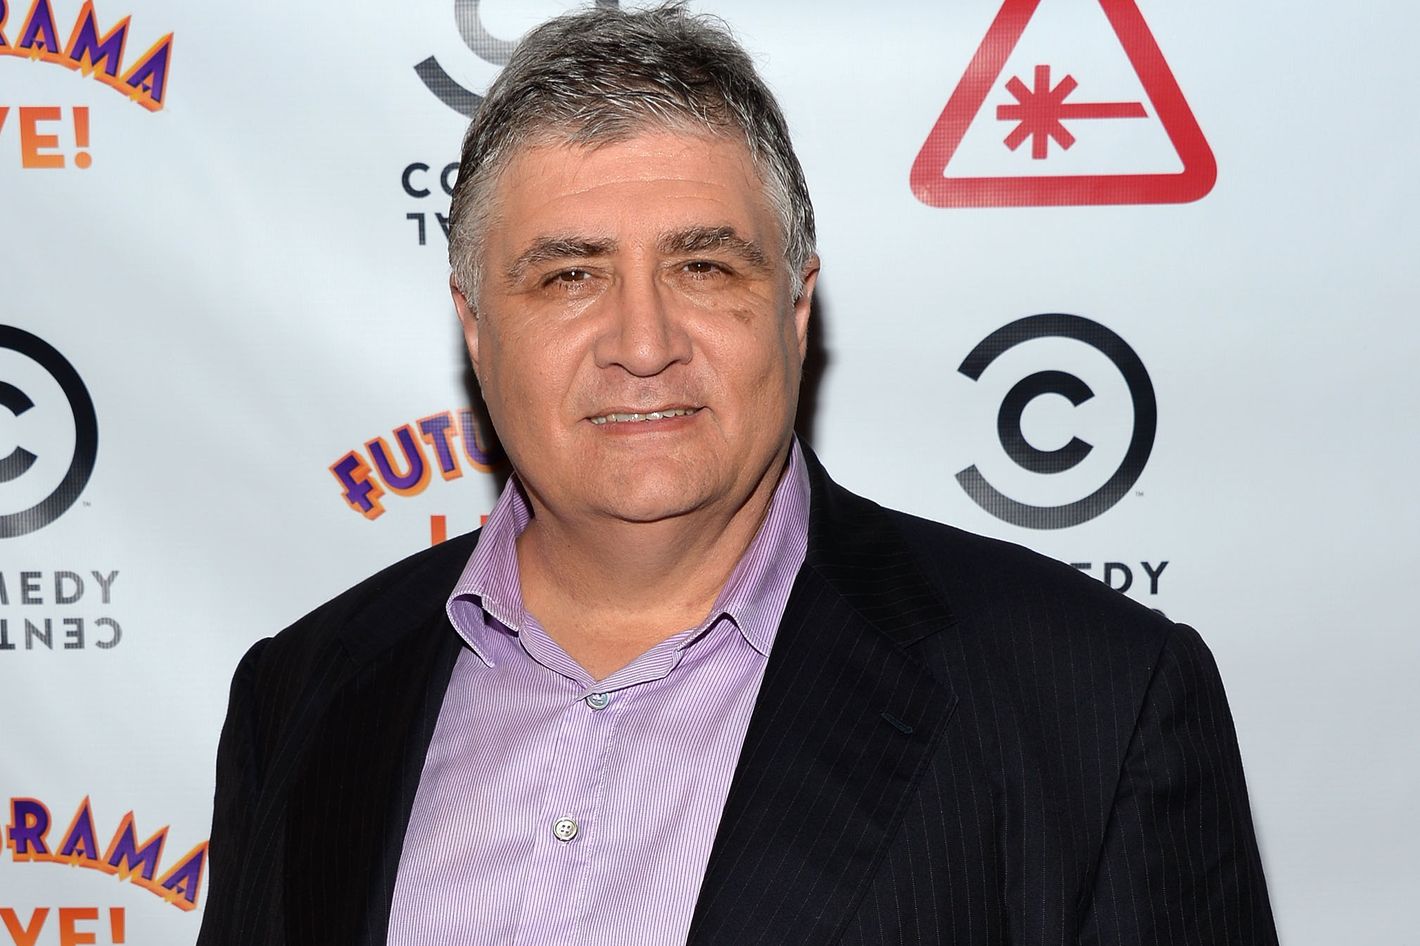 INTERVIEW: Rob Paulsen & Maurice LaMarche reflect on their